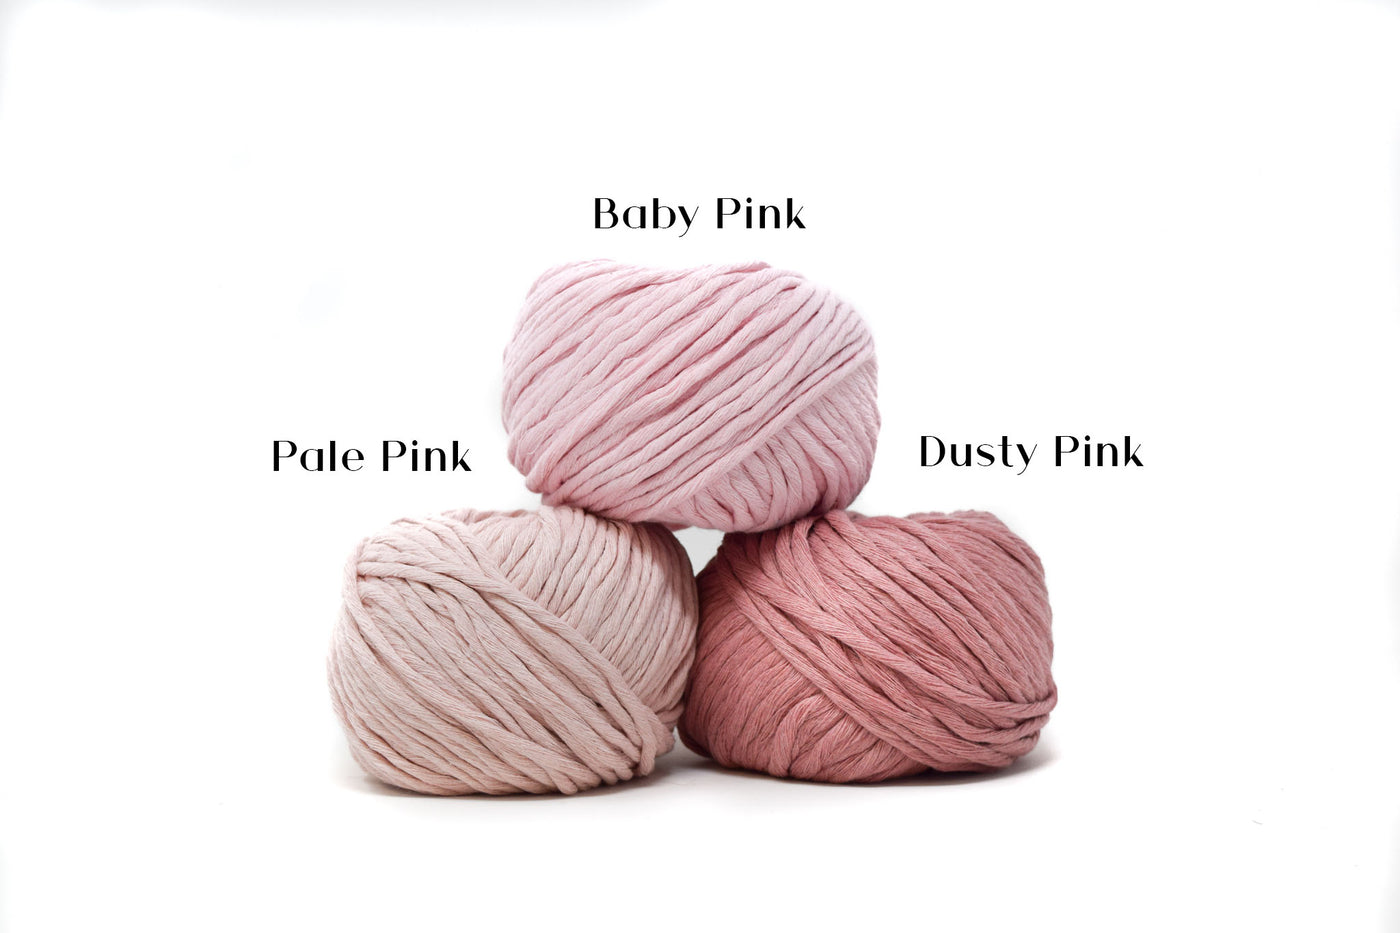 COTTON BALL ZERO WASTE 3 MM - BABY PINK COLOR